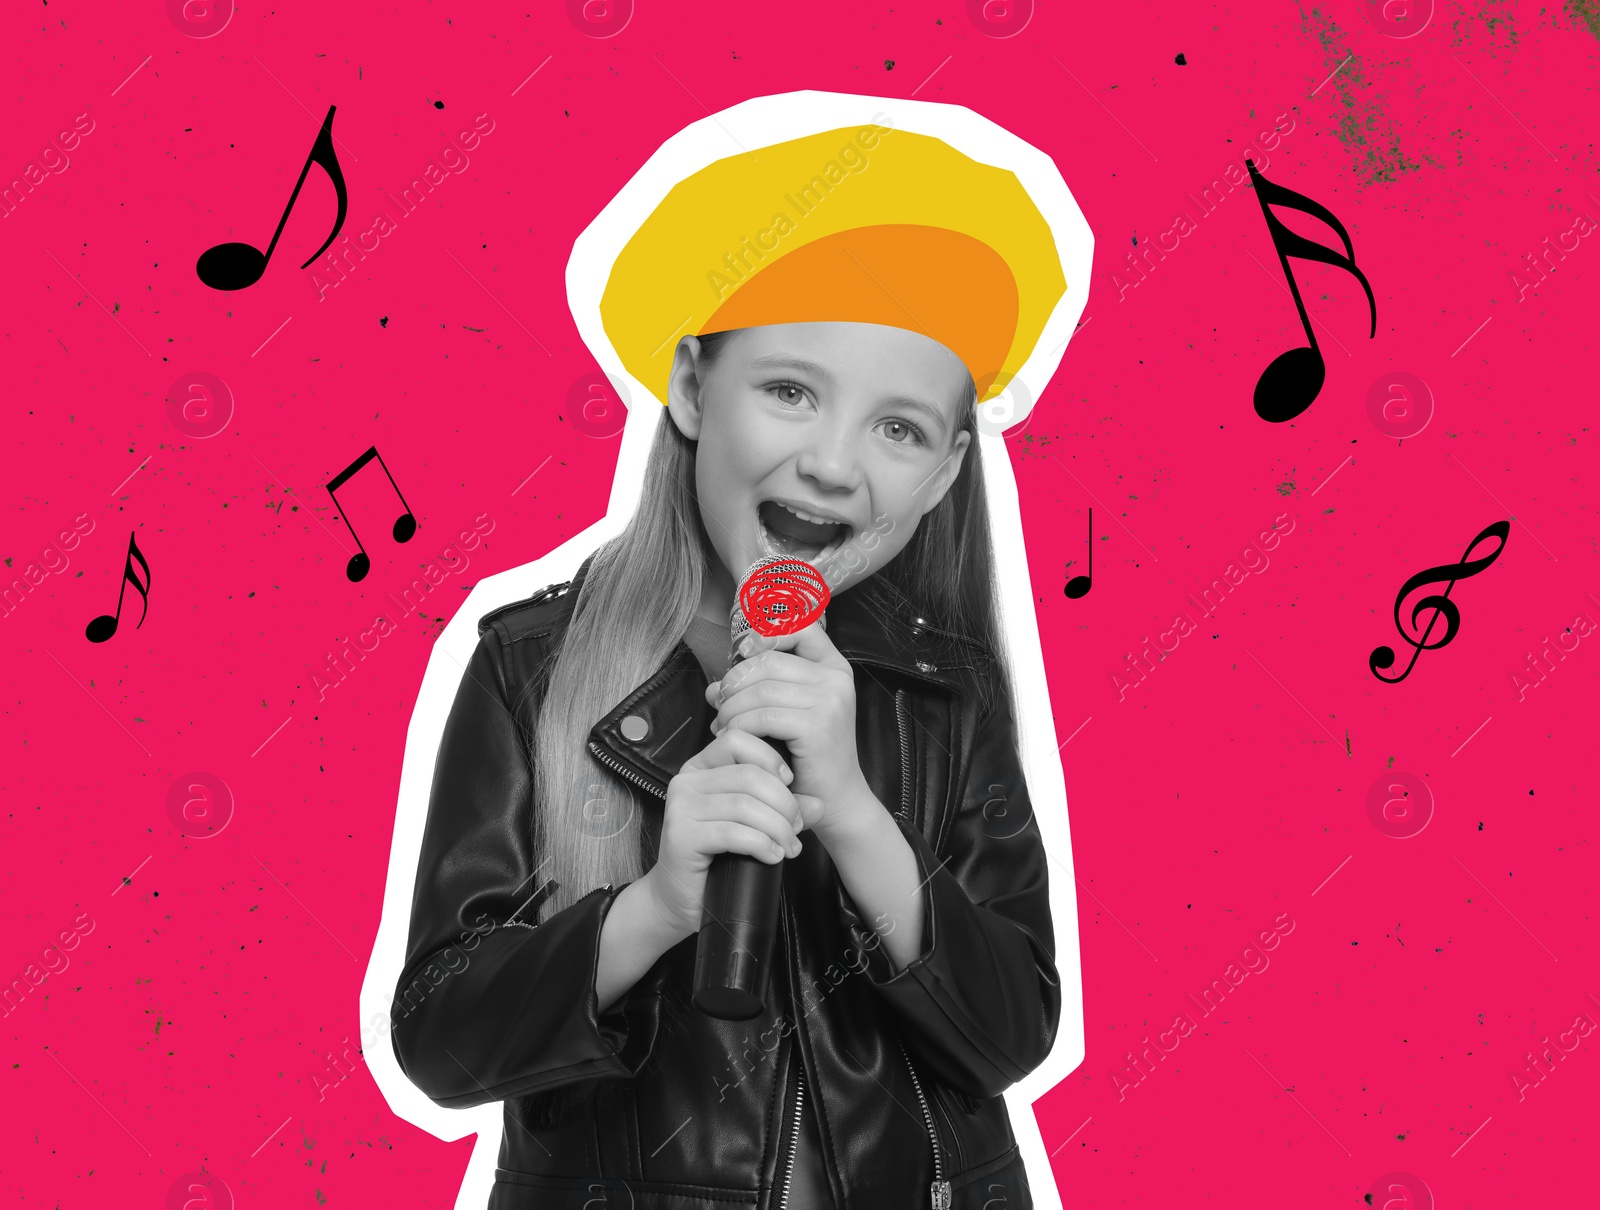 Image of Cute little girl singing into microphone on bright background, creative collage